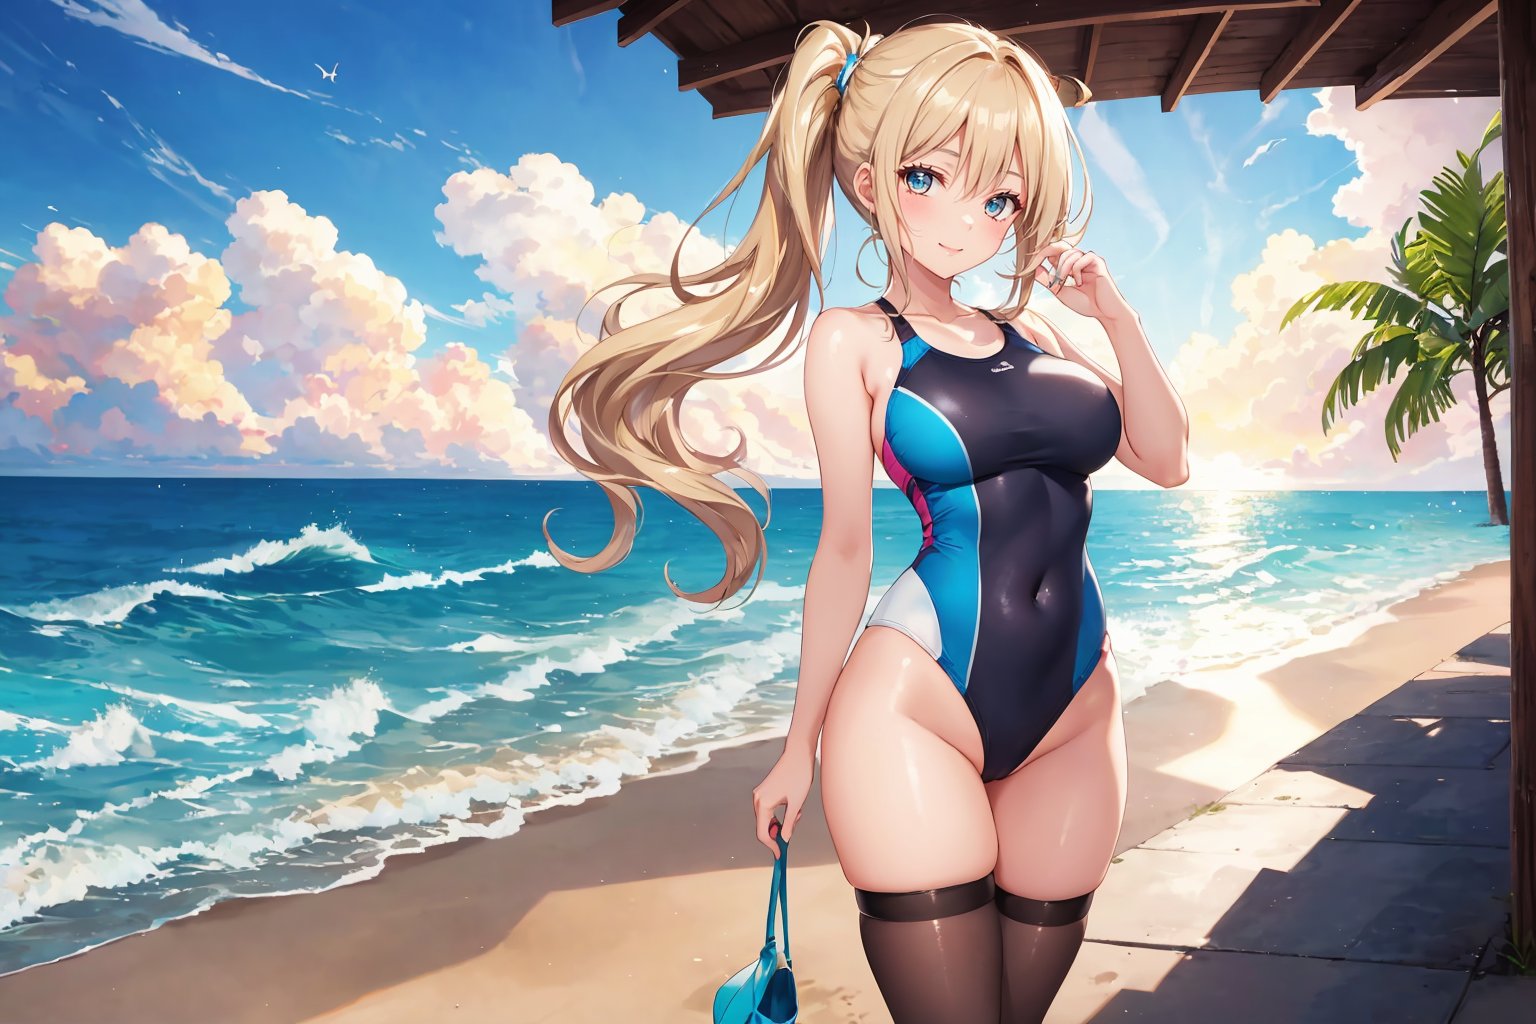 A 16-year-old girl stands confidently on the beach, her long light blond hair tied back in a side ponytail, with loose waves framing her face. She wears a bright swimsuit, paired with thigh-high stockings and high heels that add to her alluring pose. A gentle smile spreads across her face as she gazes out at the ocean, where a drizzly mist creates a romantic atmosphere.